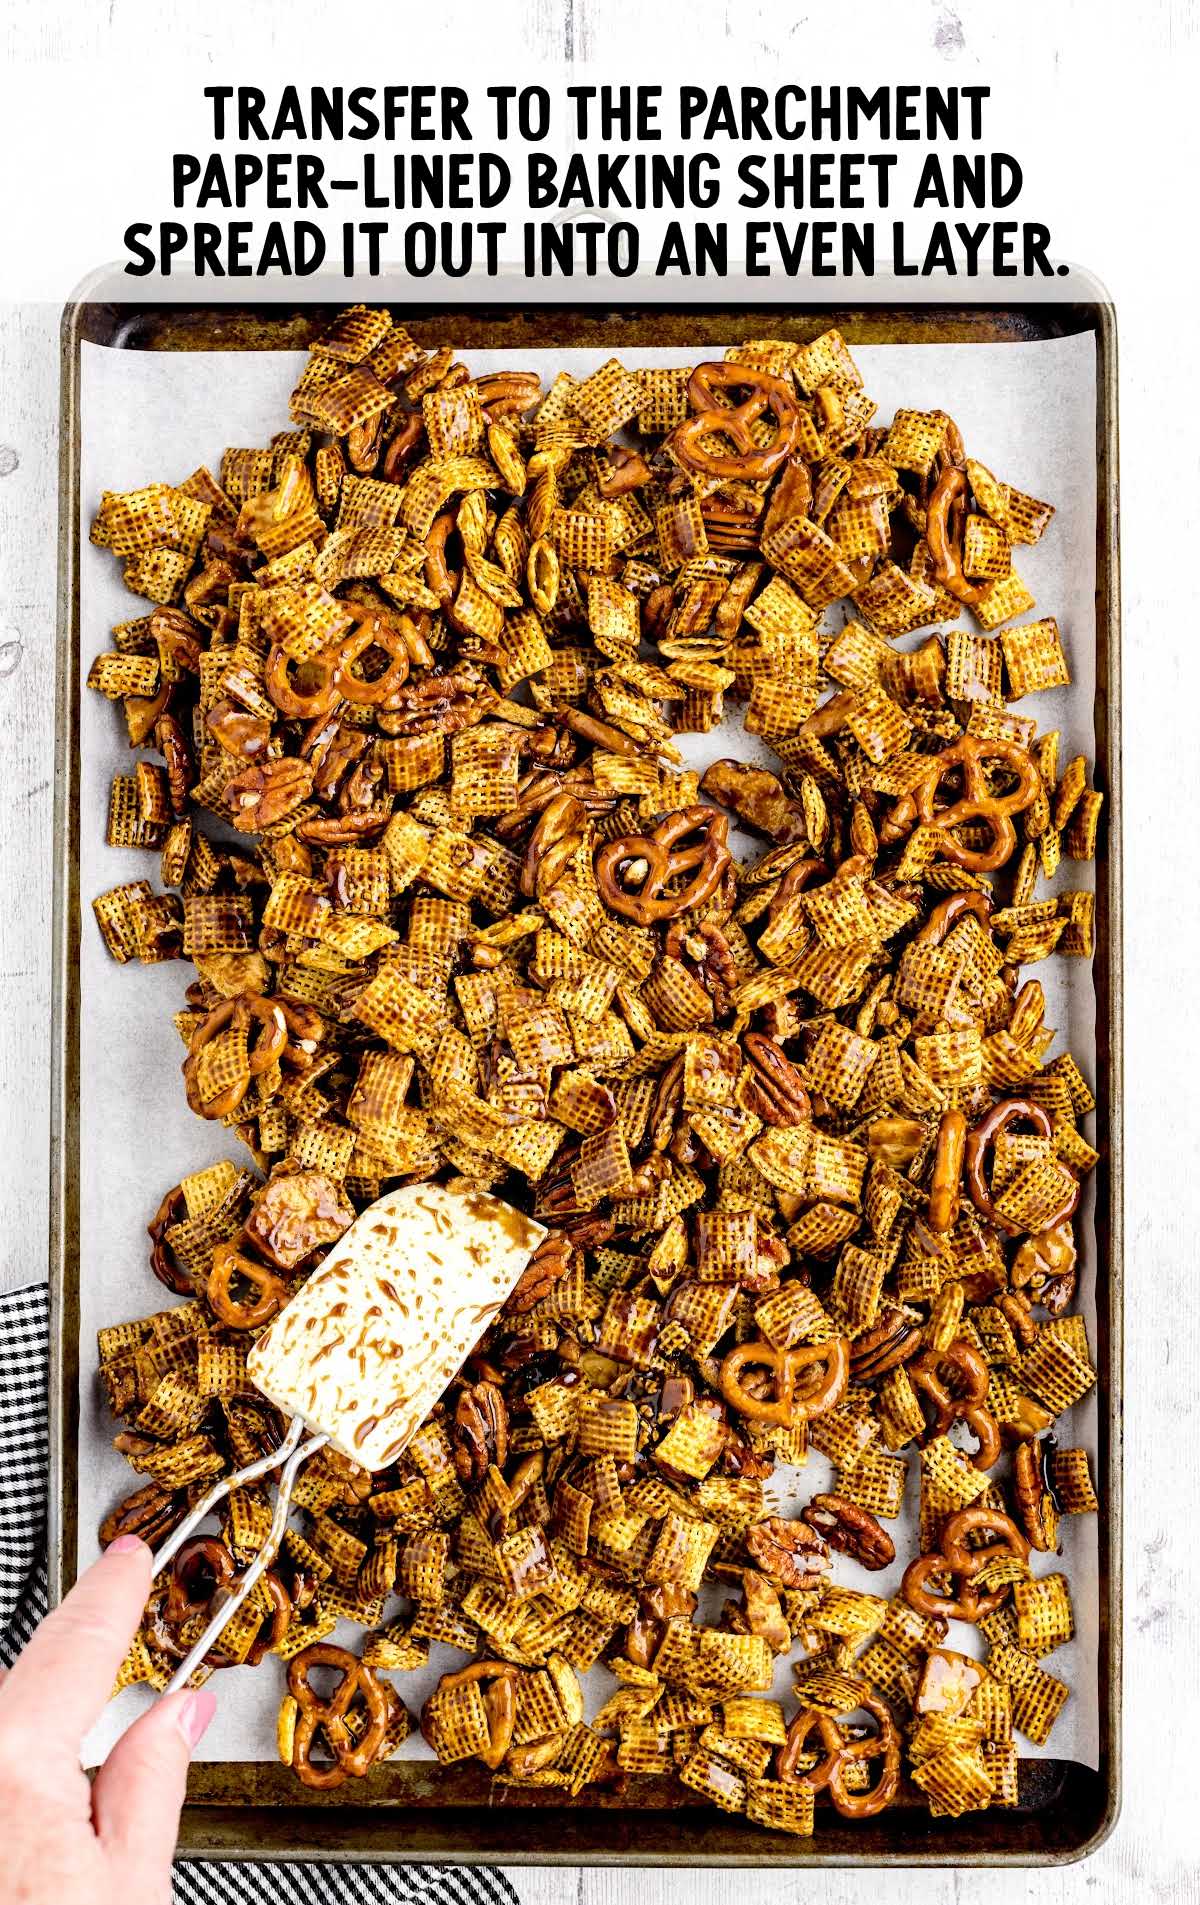 chex mix transferred into a baking sheet